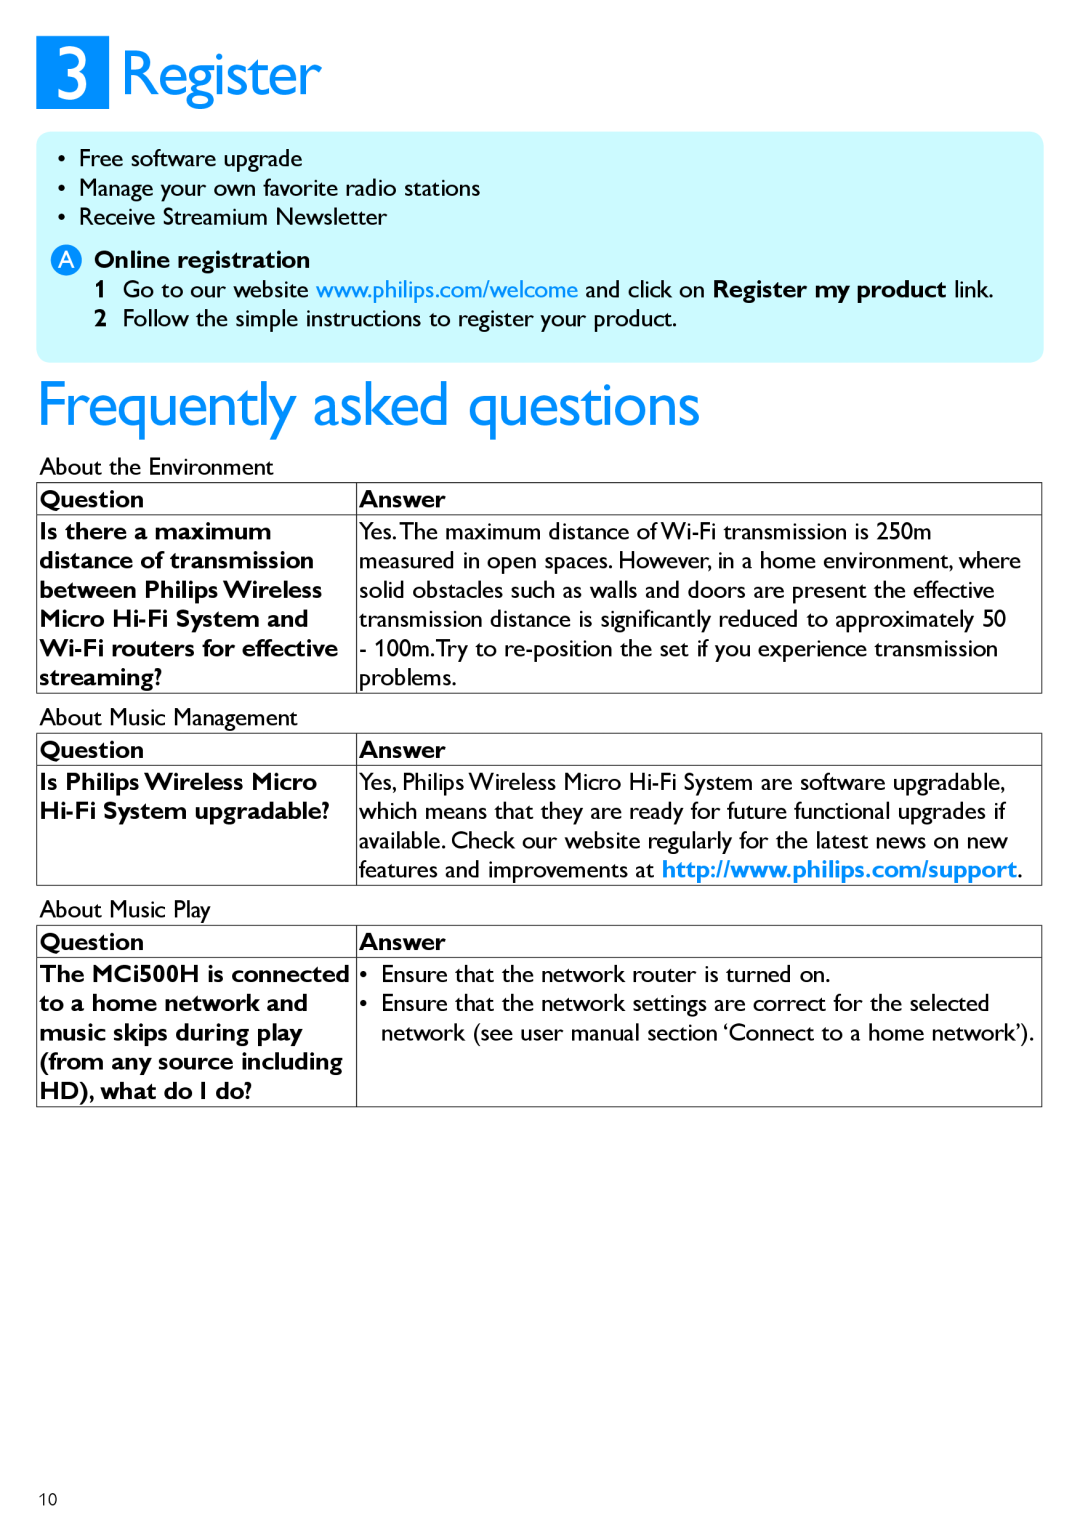 Philips MCi500H Register, Frequently asked questions, A Online registration, About the Environment, Question, Answer 